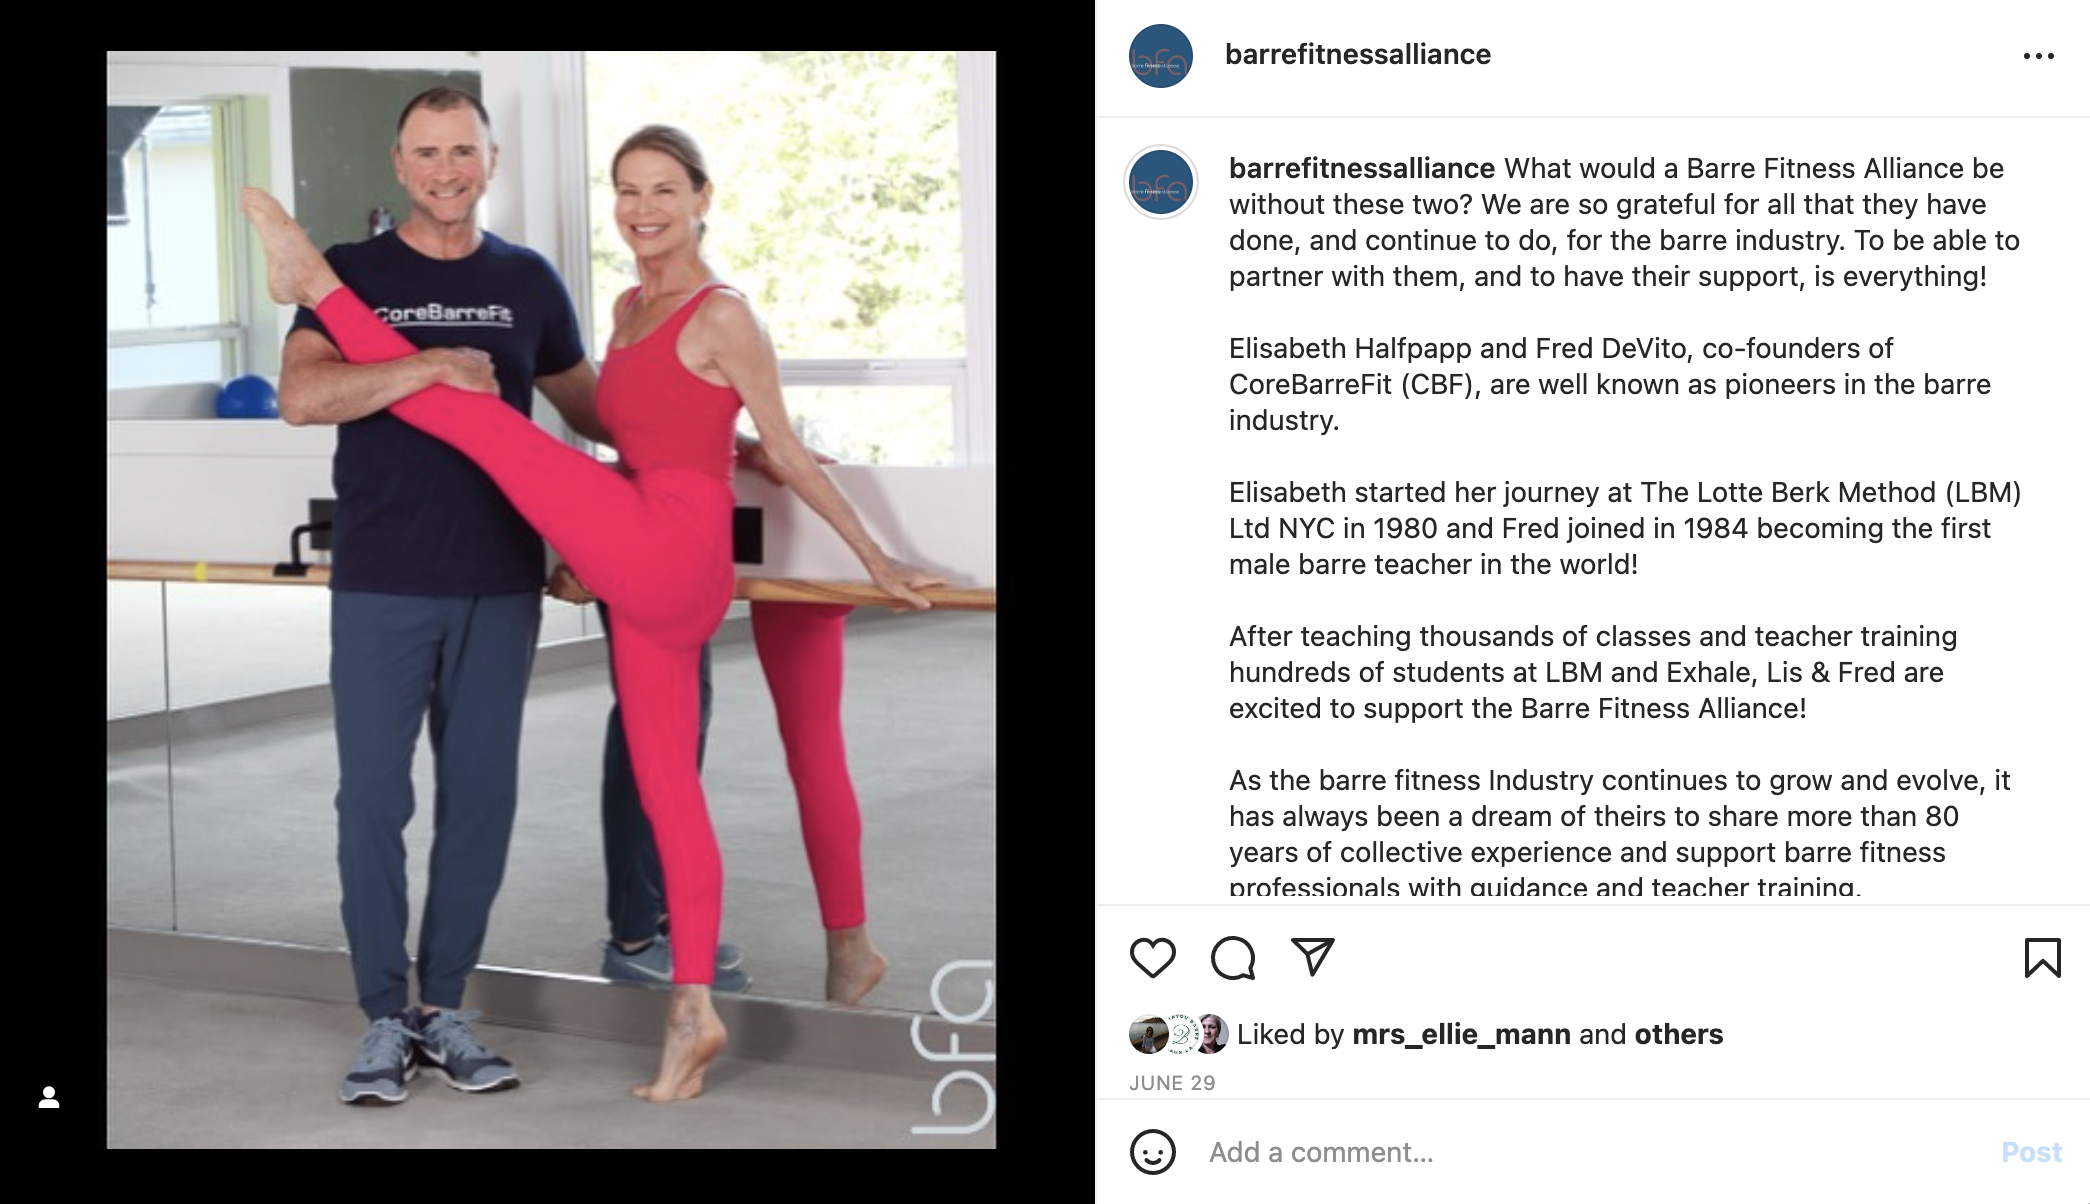 Elisabeth Halfpapp and Fred DeVito of Core Barre Fit